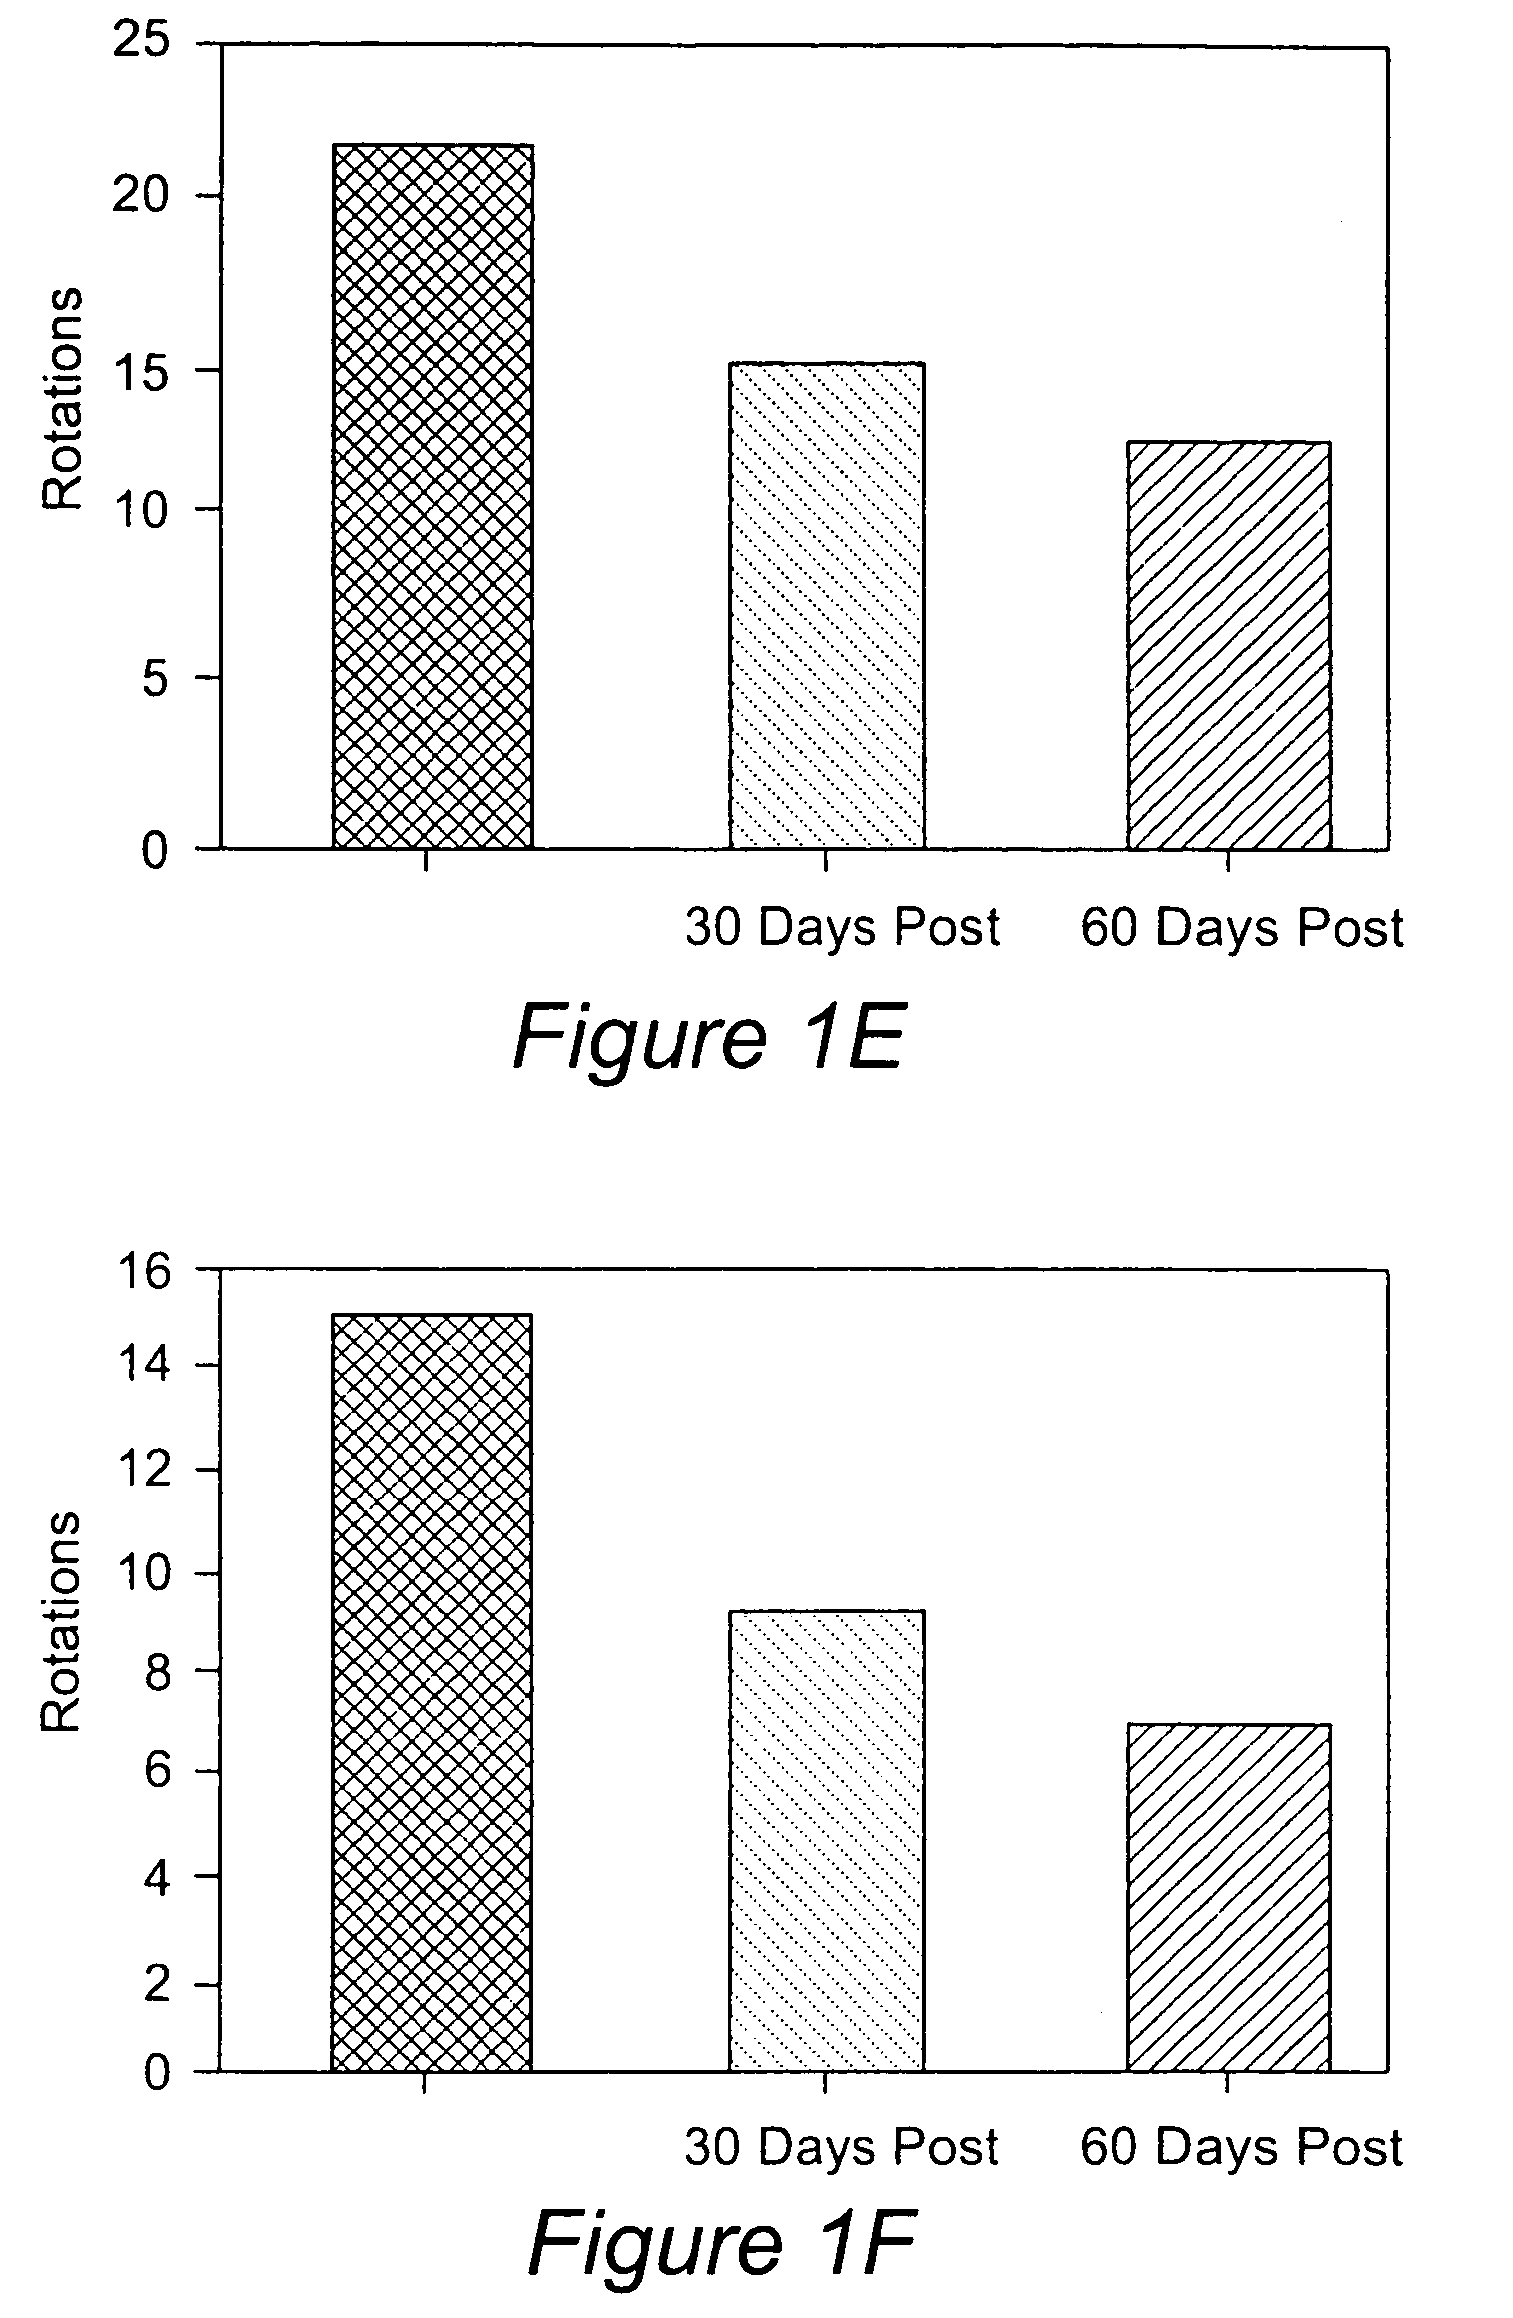 Differentiation of specialized dermal and epidermal cells into neuronal cells